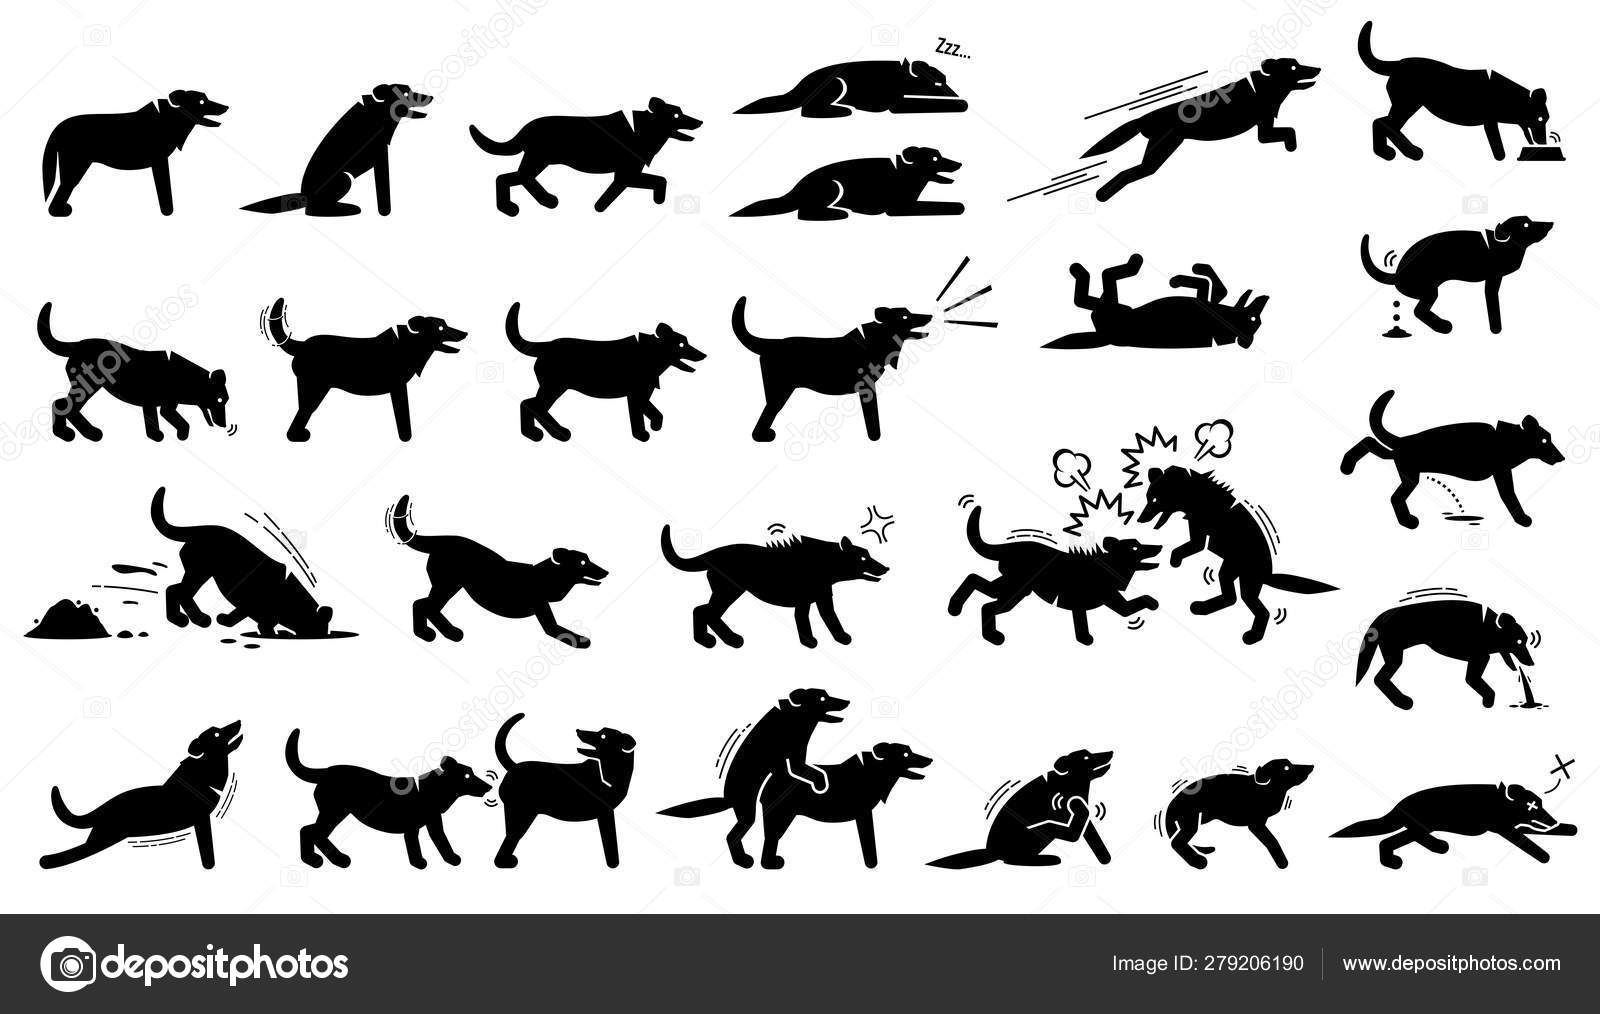 Dog Actions Reactions Postures Body Languages Illustrations Depict Dog ...